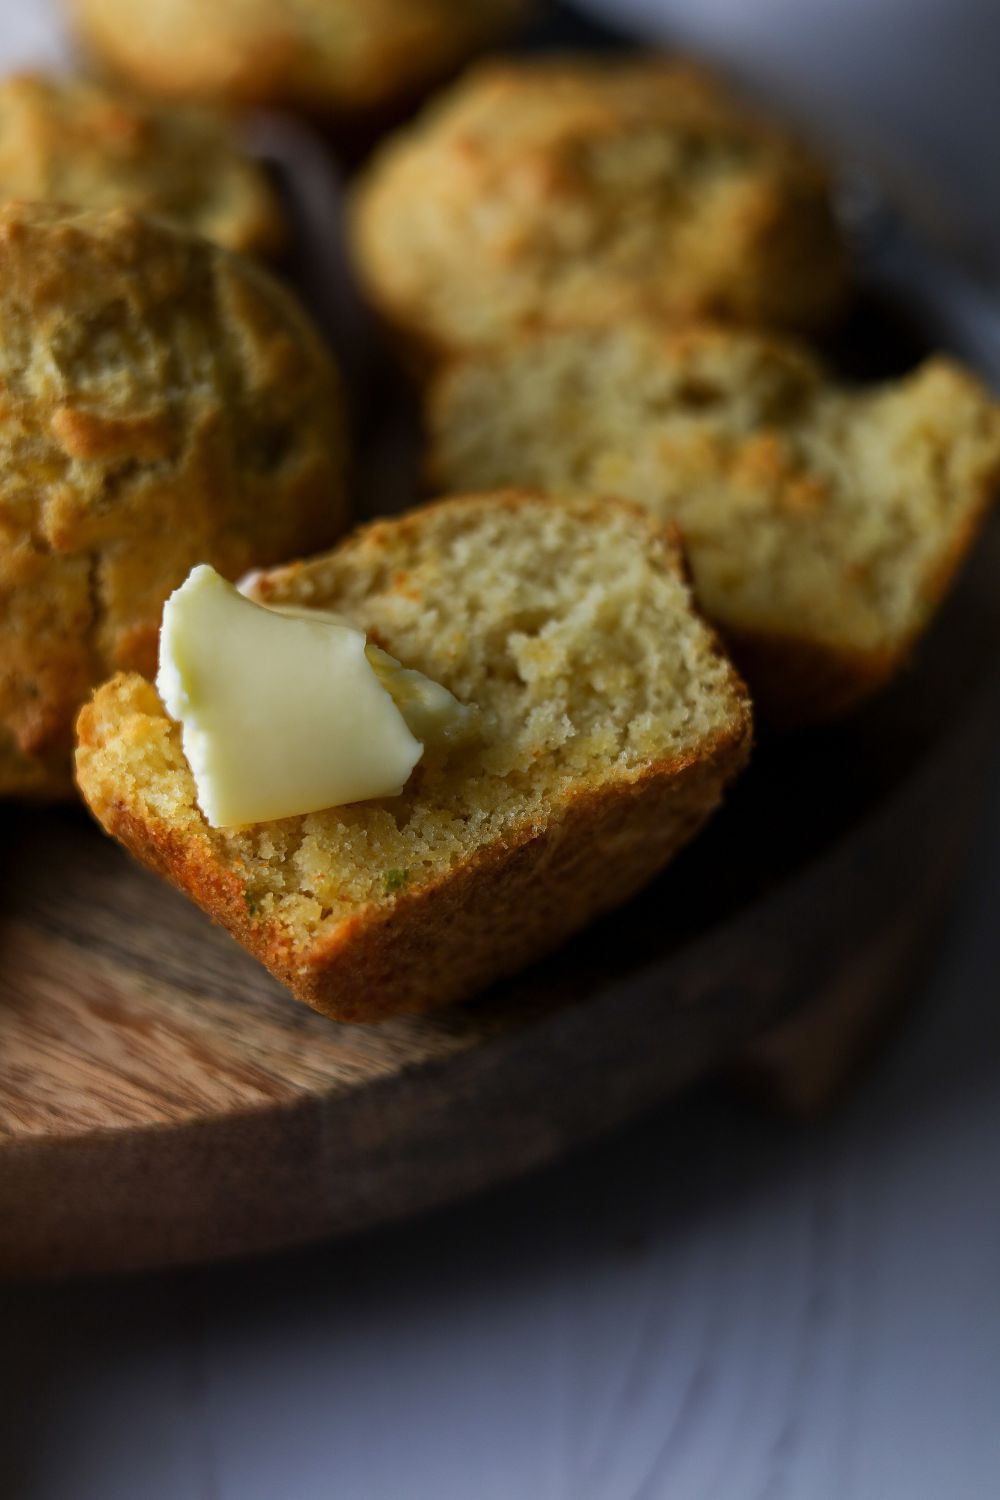 Muffin cut in half with a blob of butter on the piece on the left